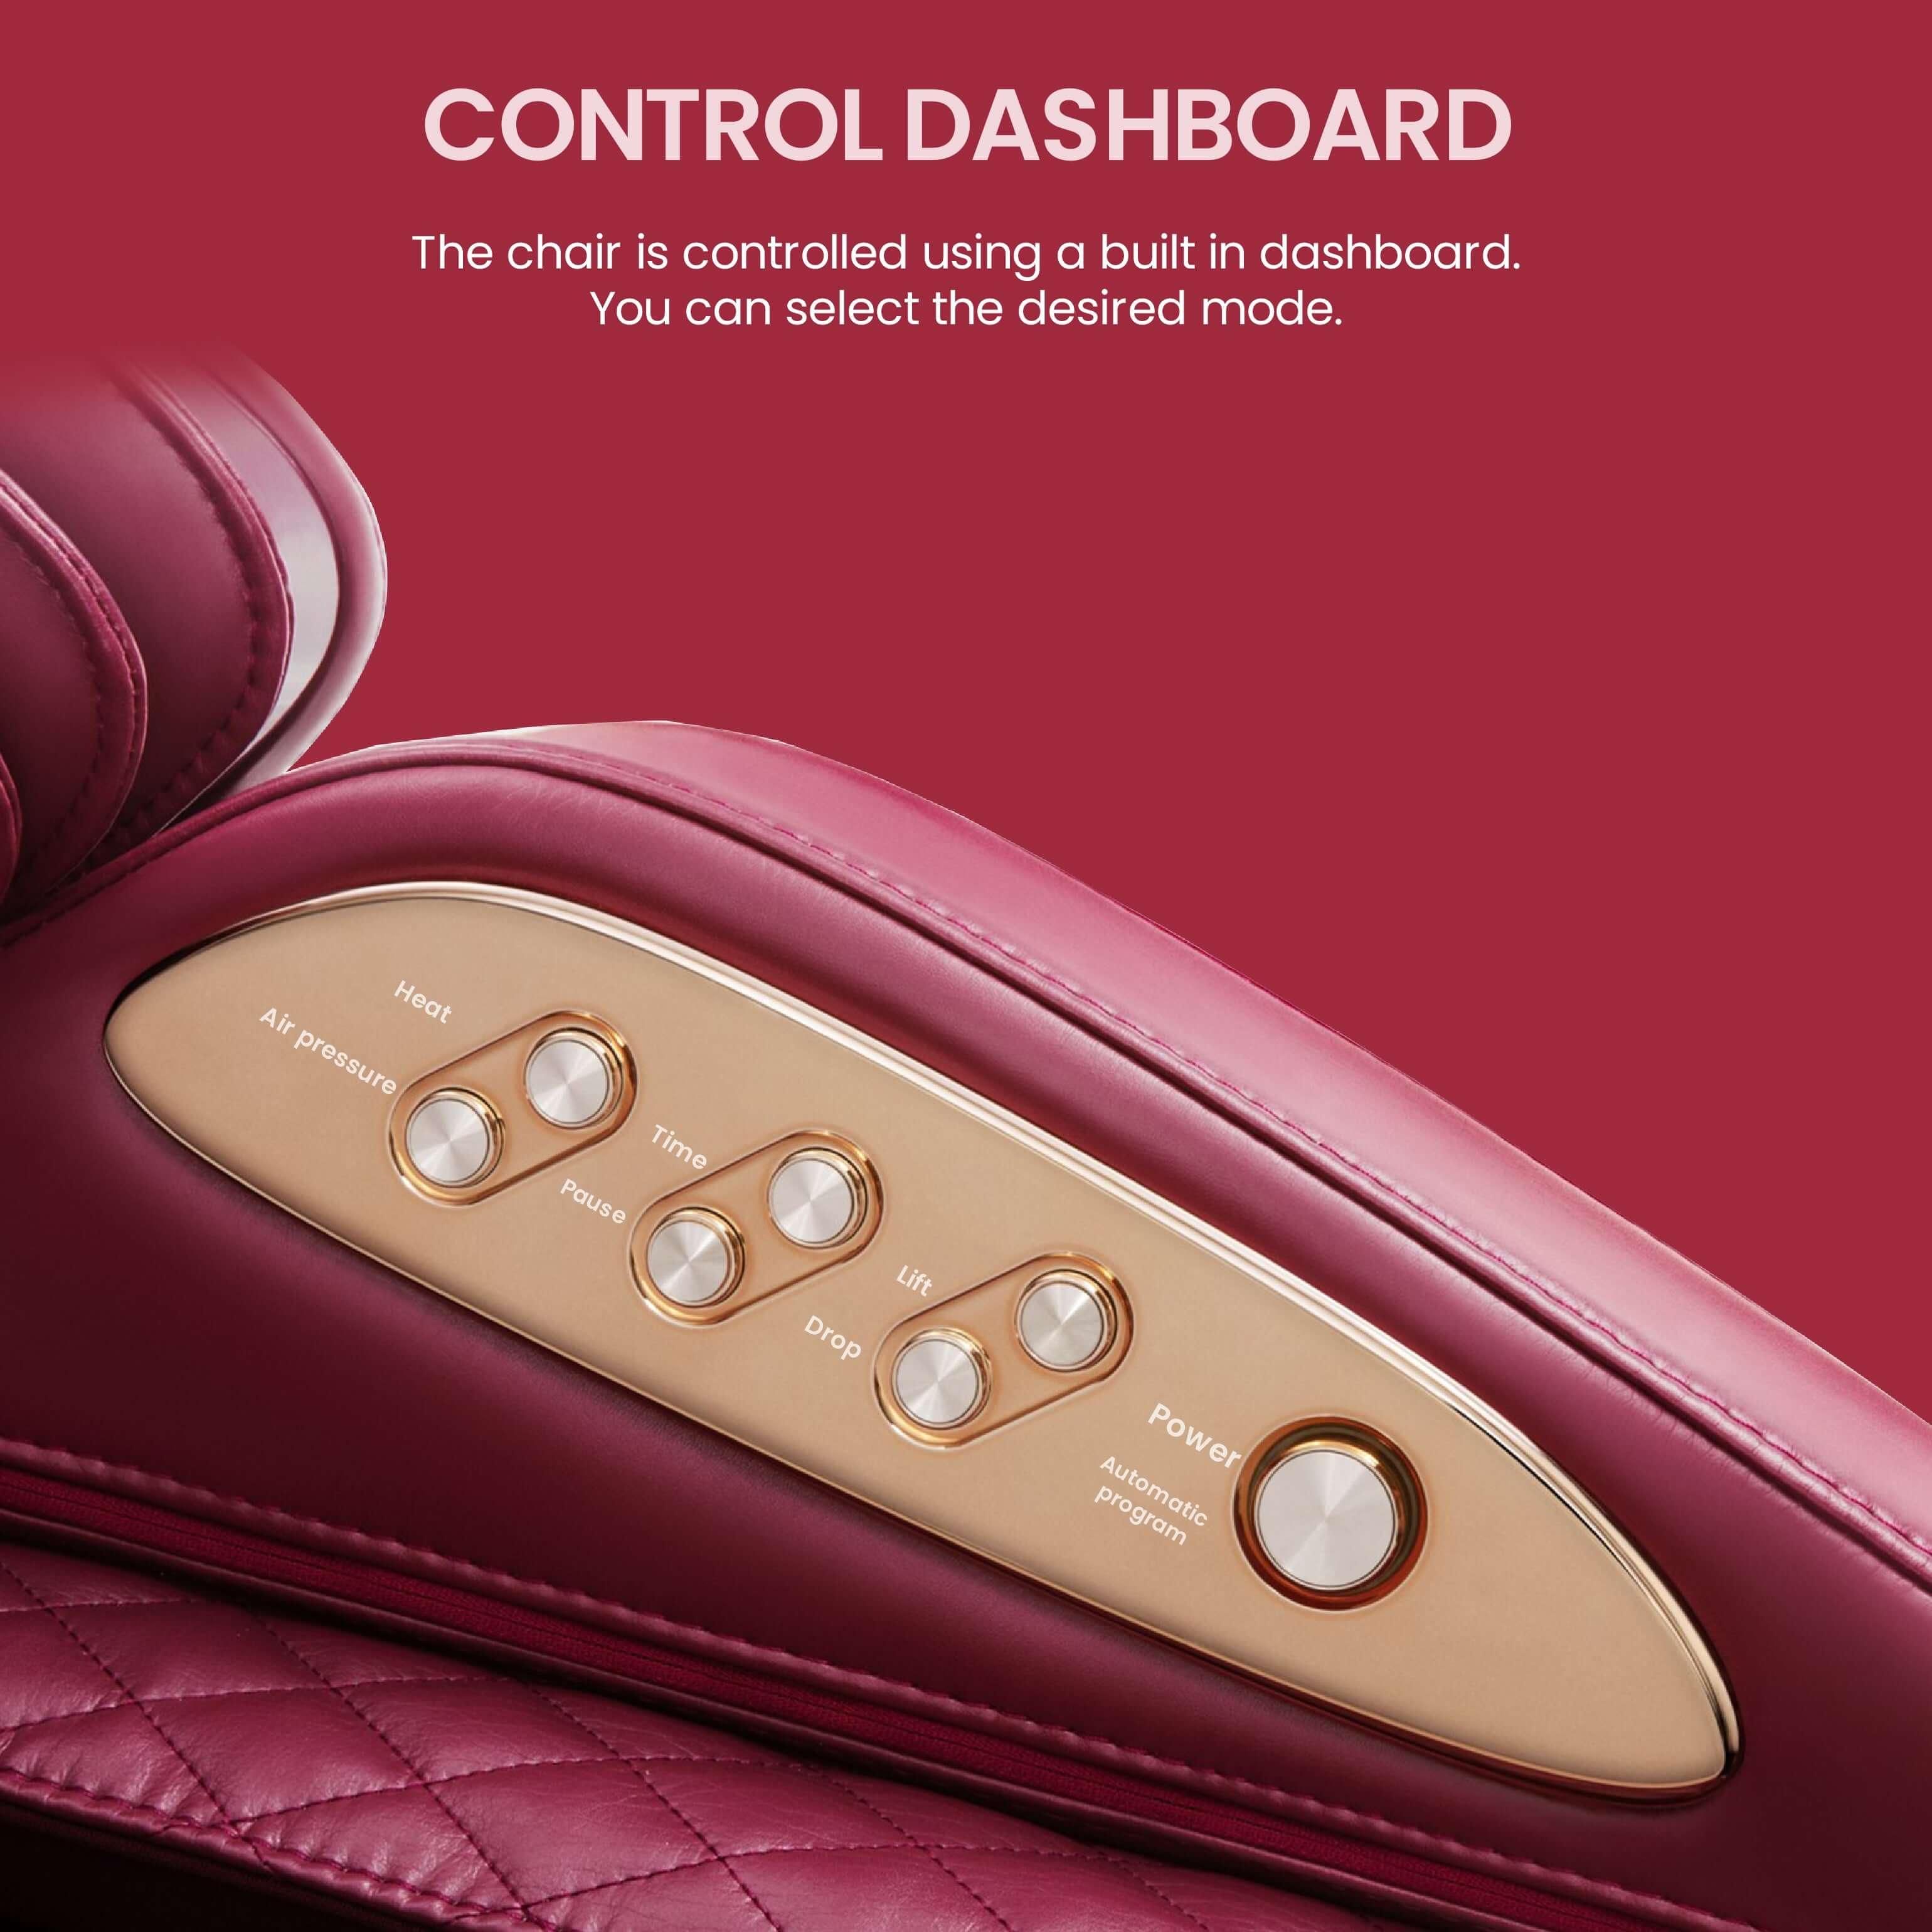 Control dashboard of the best massage chair in UAE showcasing various settings for a customized massage experience. best massage chair uae, massage chair Dubai, massage chair uae, massage chair Saudi Arabia, كرسي التدليك, Best massage chair in Dubai UAE, 